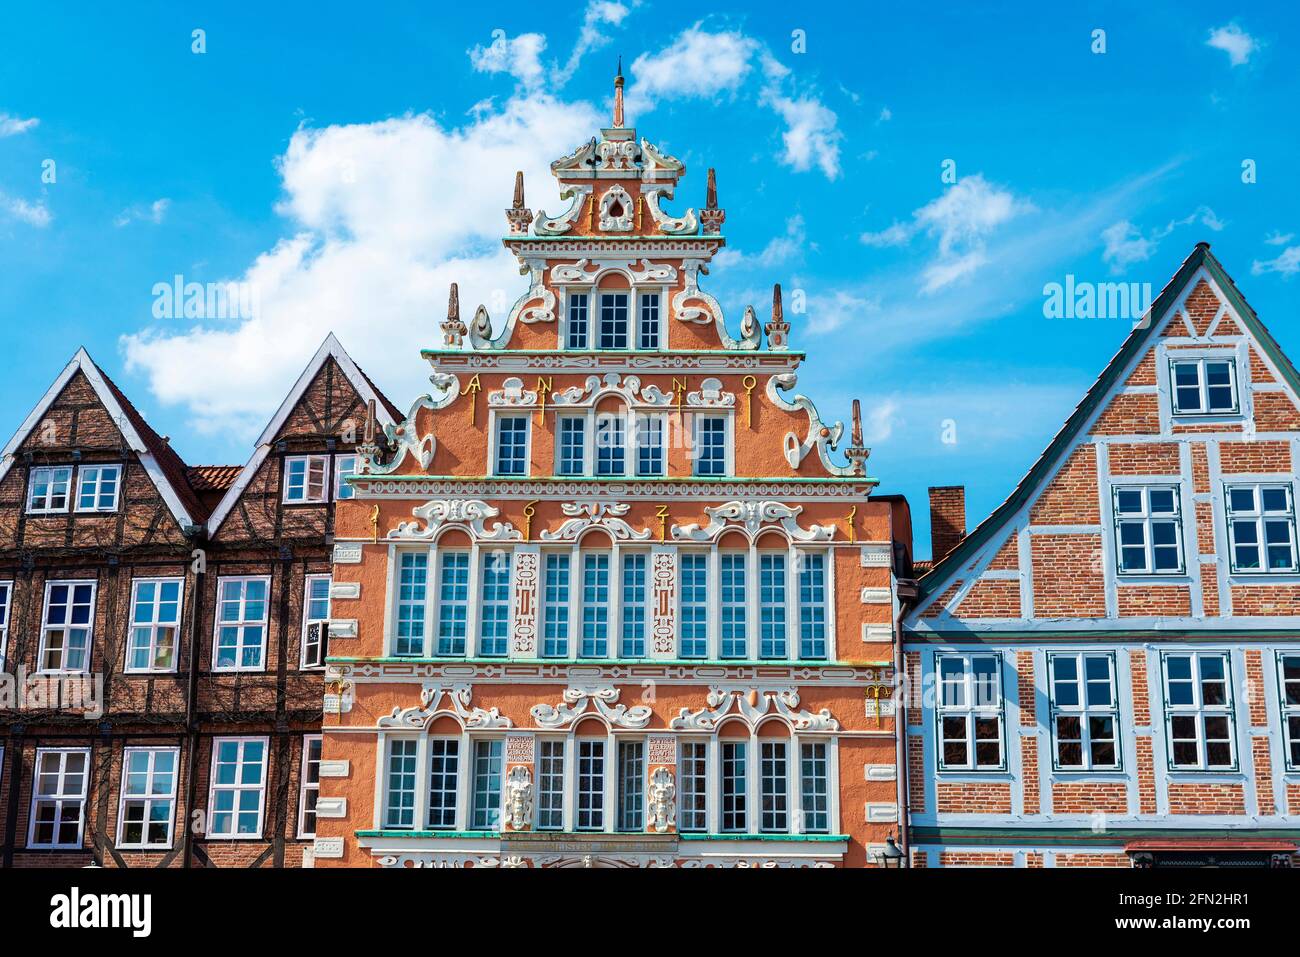 Old classic building of Weser Renaissance style and medieval houses in Hansestadt Stade, Lower Saxony, Germany Stock Photo